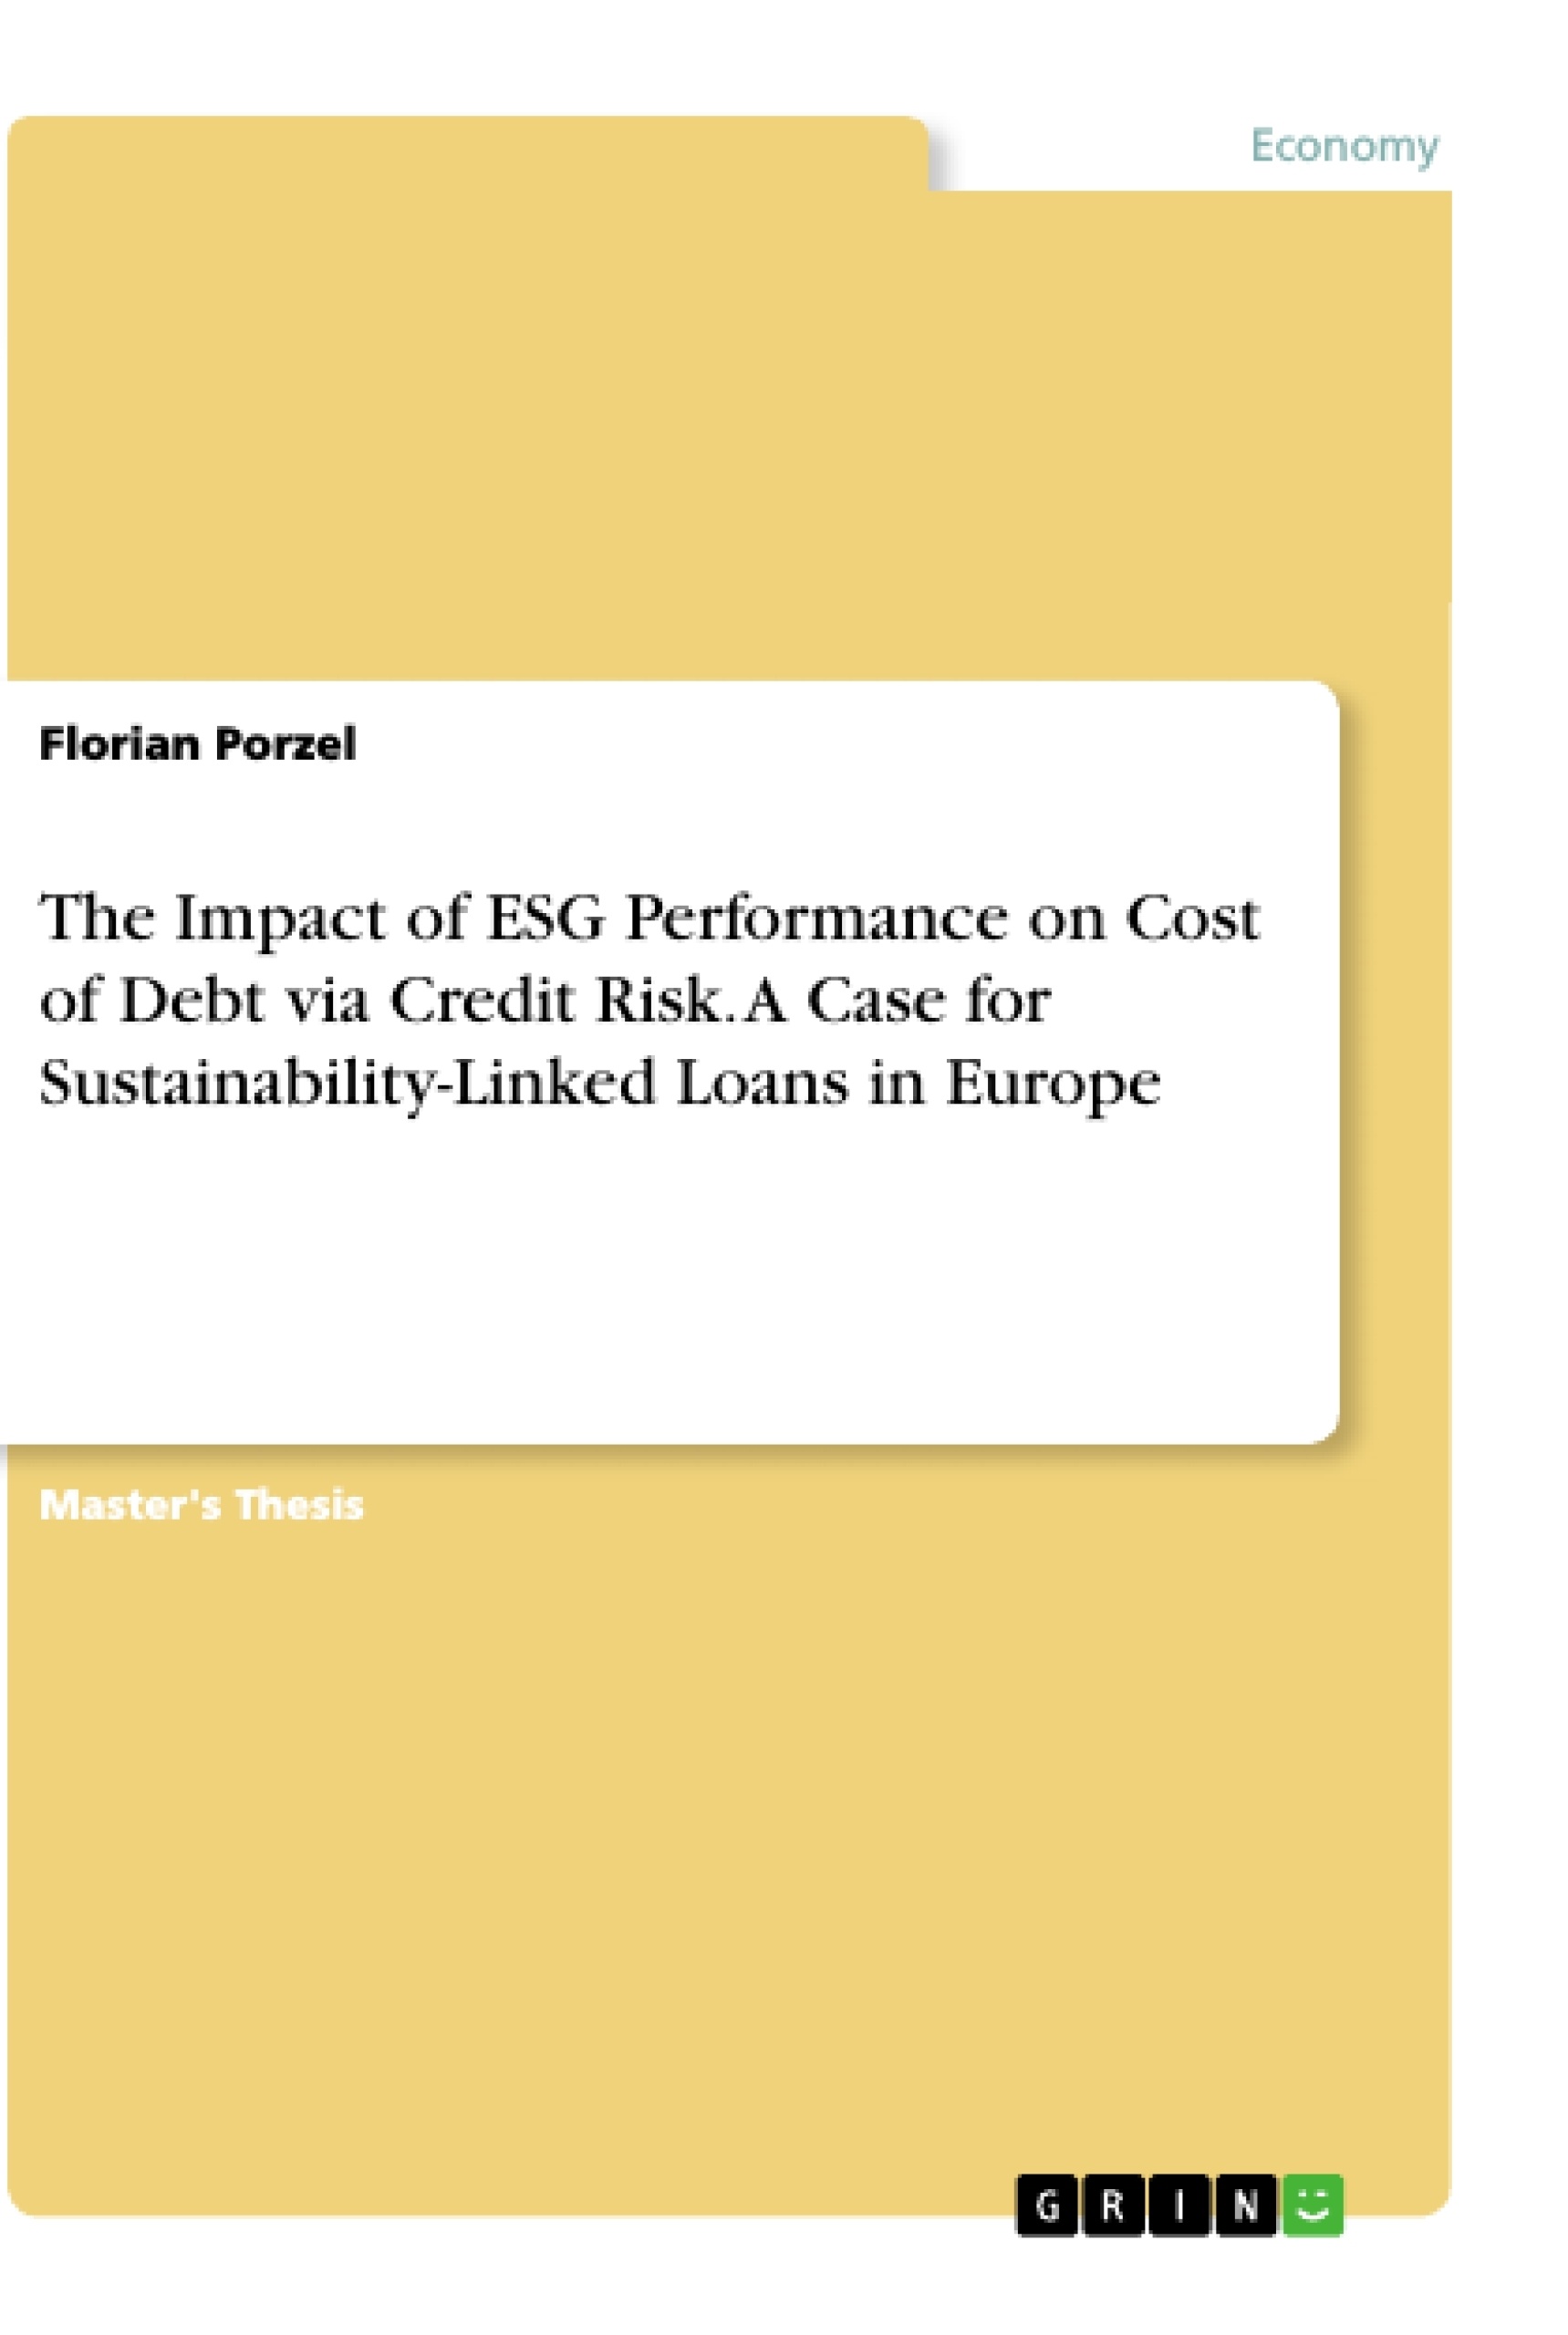 Title: The Impact of ESG Performance on Cost of Debt via Credit Risk. A Case for Sustainability-Linked Loans in Europe